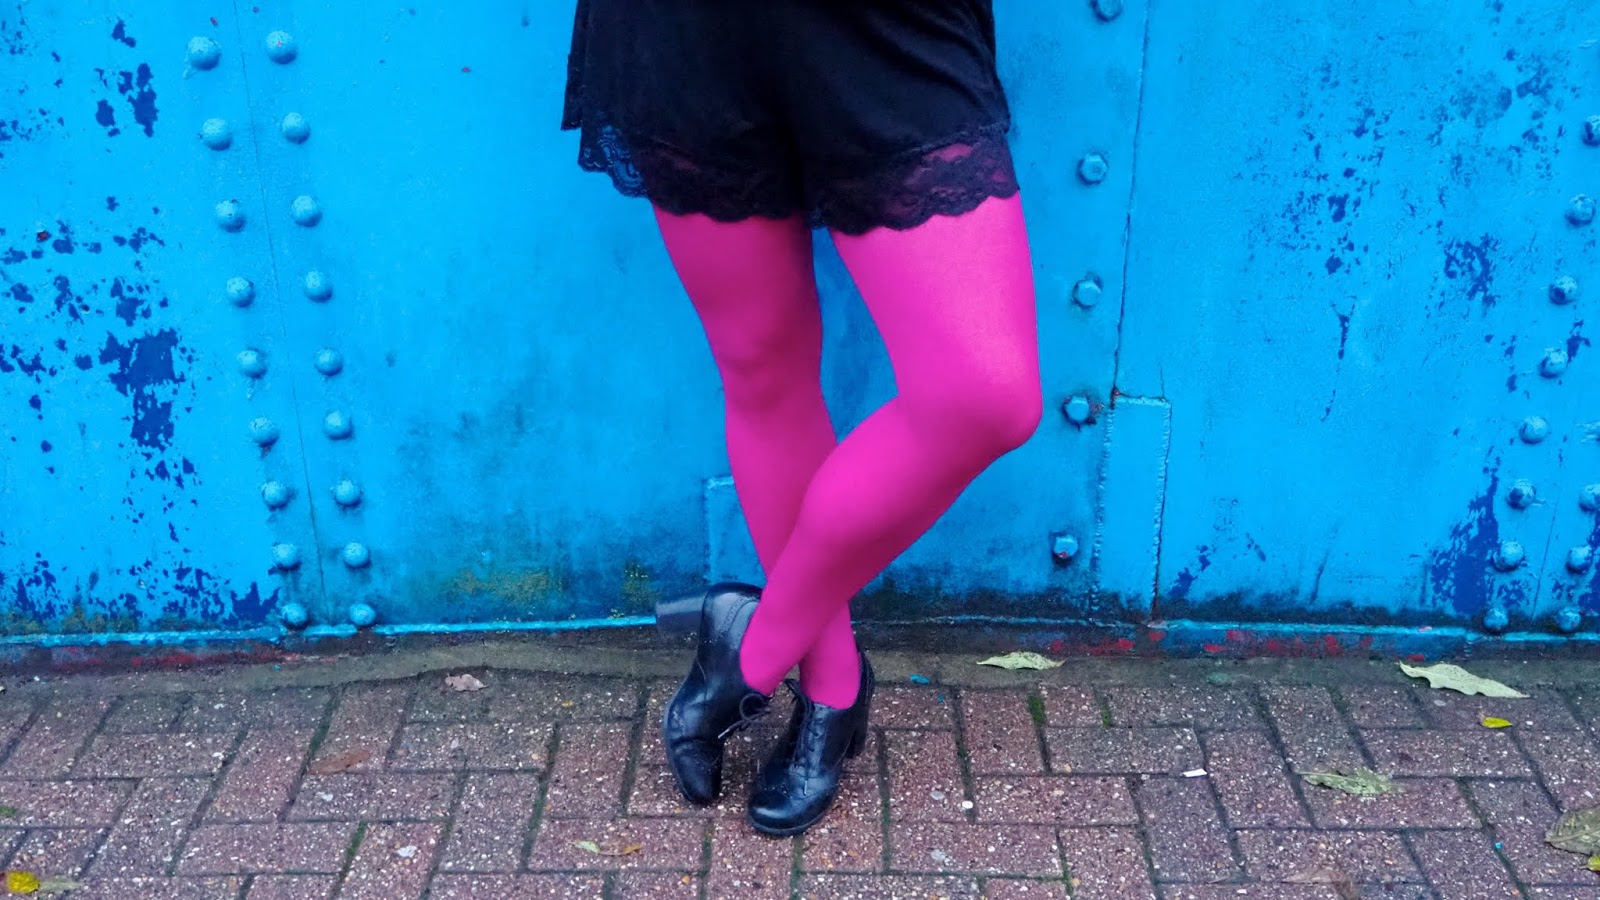 black lace culottes shorts, black brogues and hot pink opaque tights